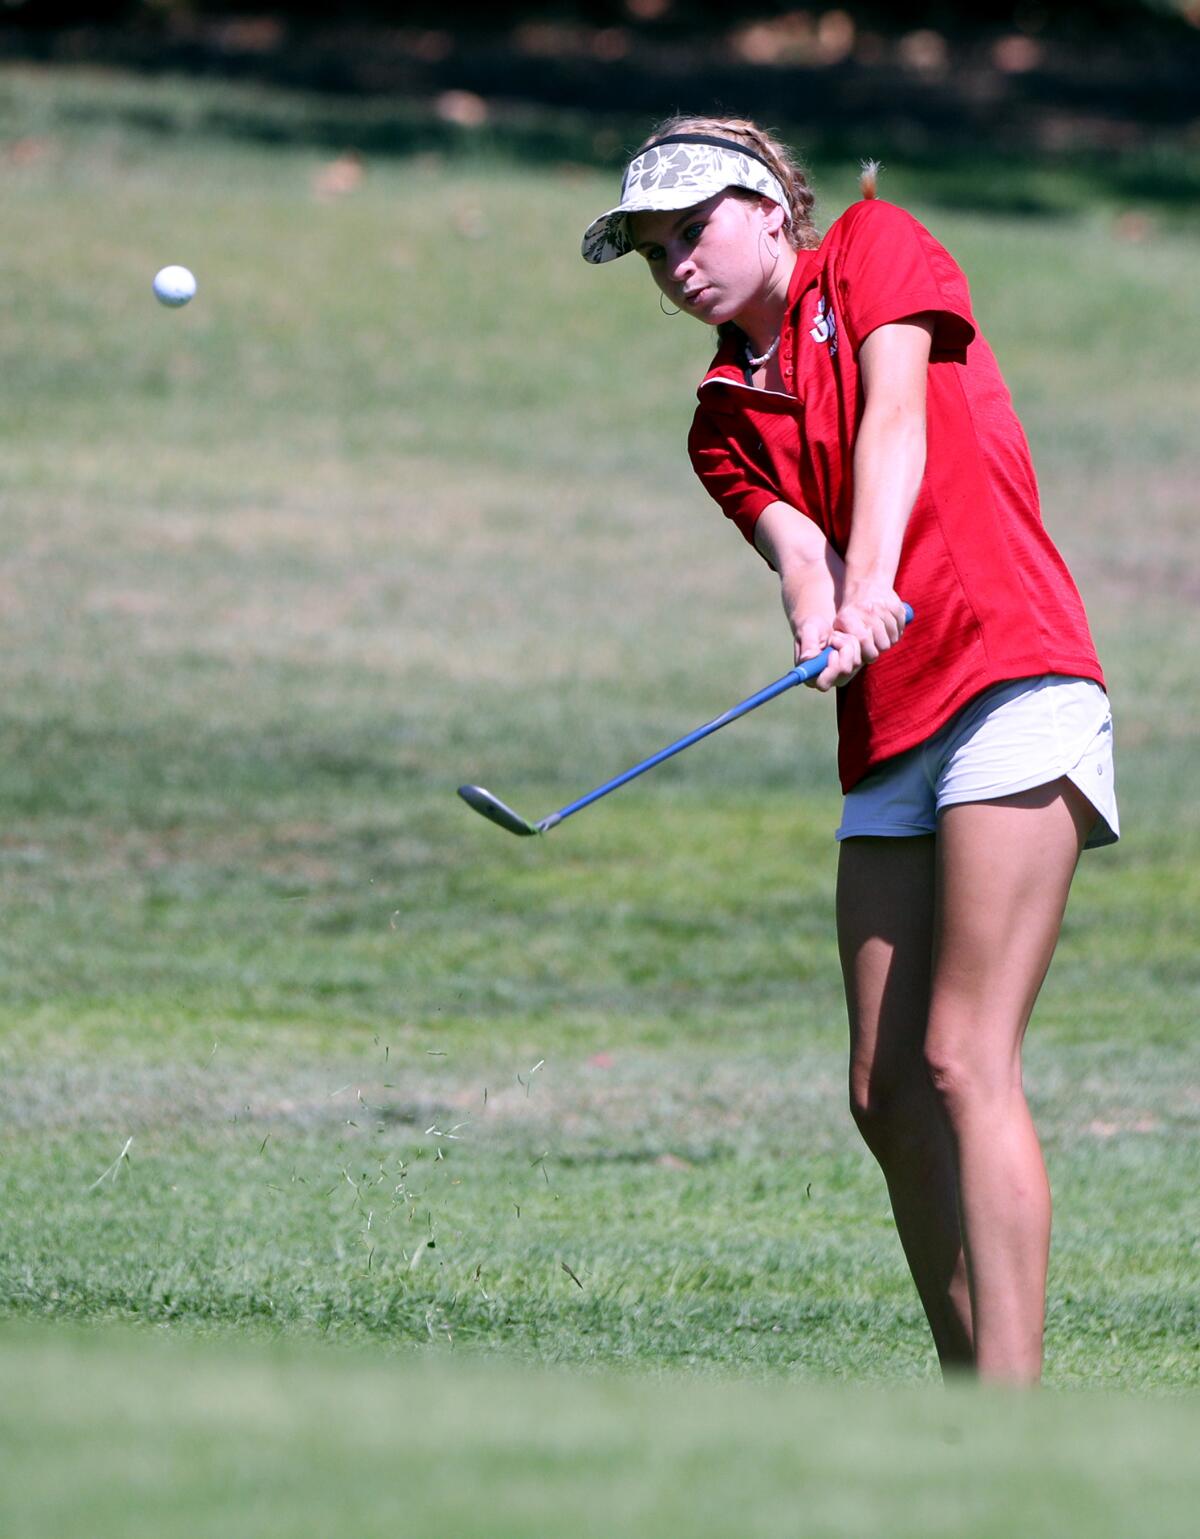 Burroughs High School golfer Abby Powell chips in onto the green during Pacific League golf match at Altadena Golf Course in Altadena on Wednesday, Sept. 4, 2019.